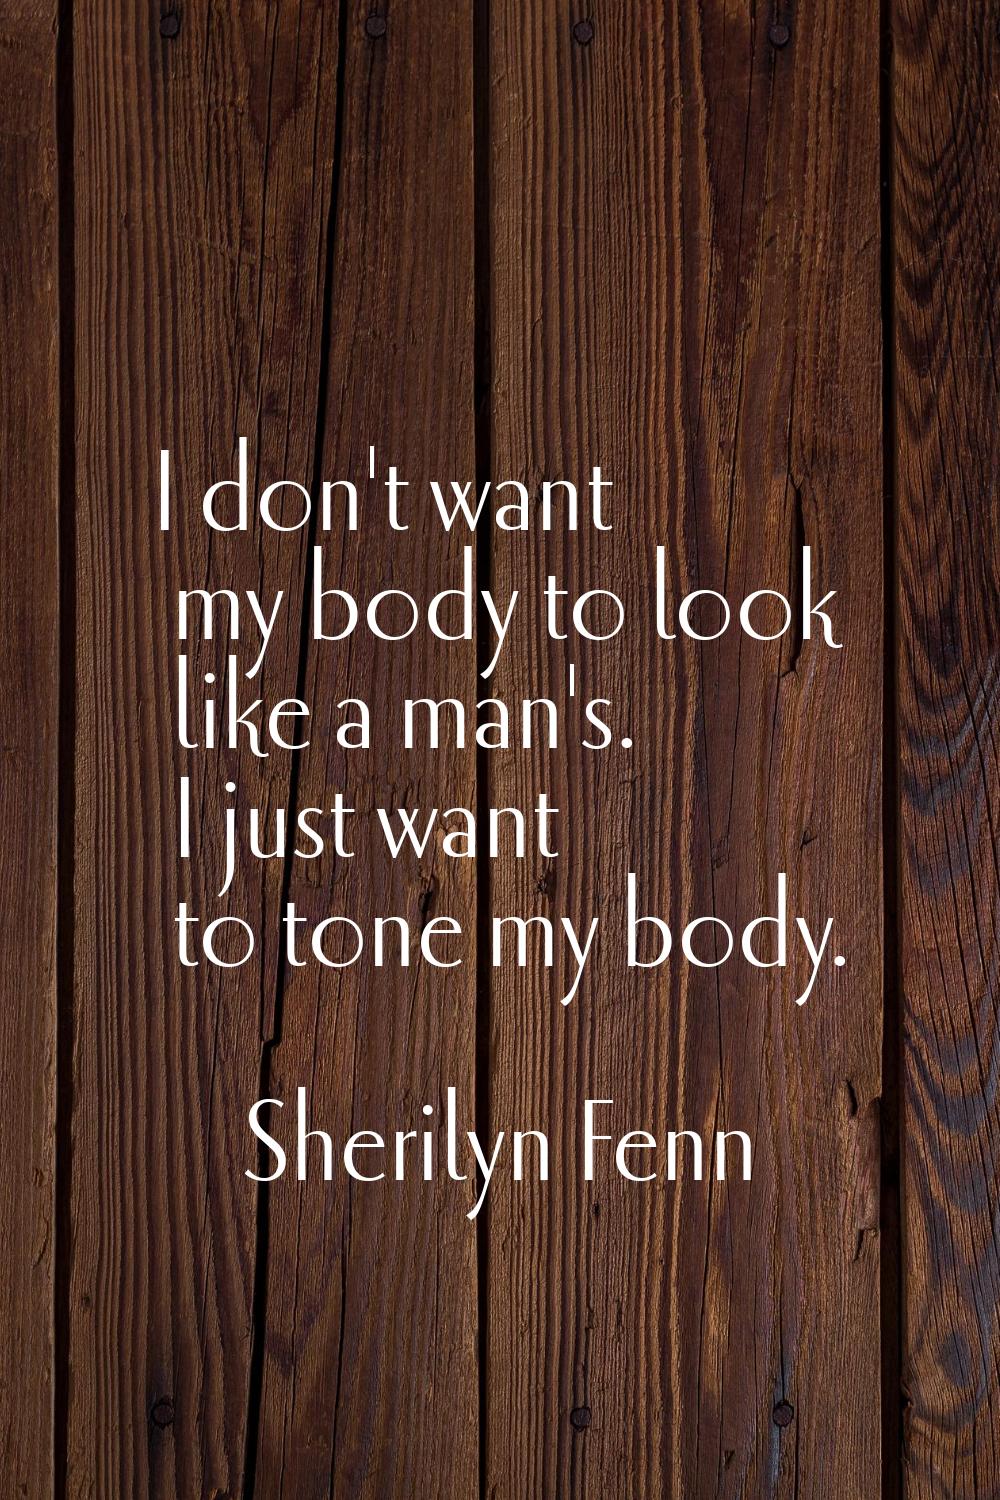 I don't want my body to look like a man's. I just want to tone my body.